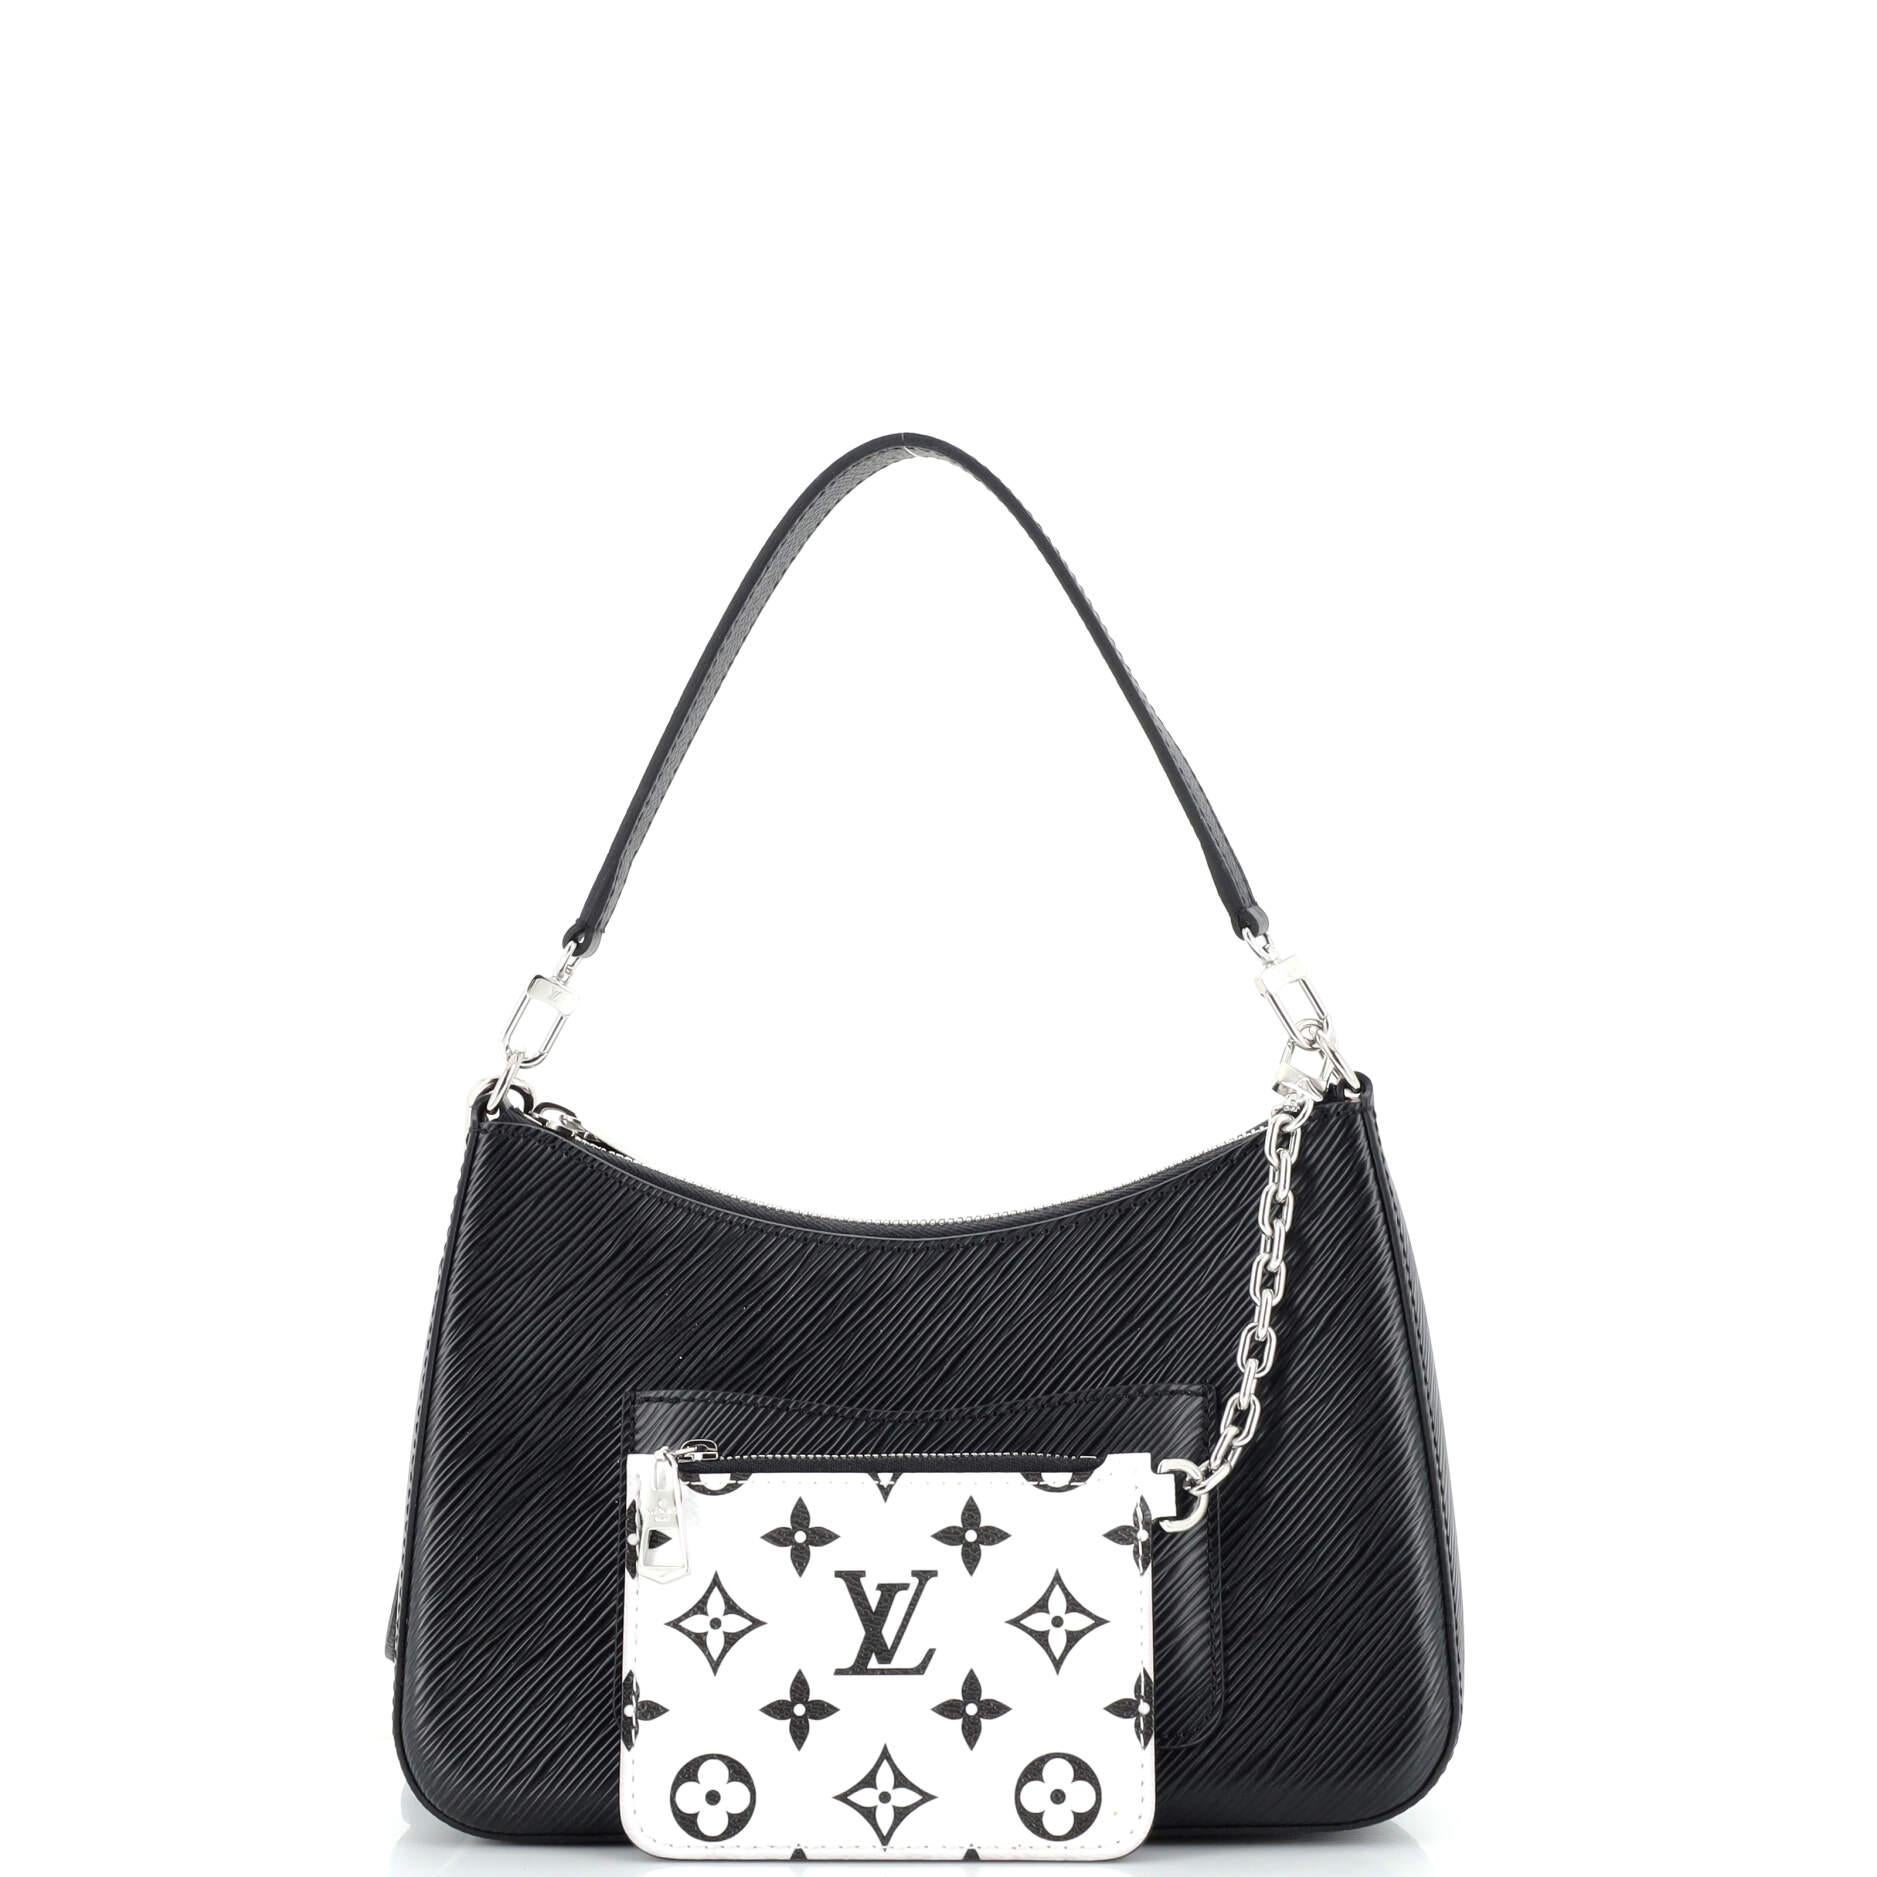 Louis Vuitton Marelle Bag - 2 For Sale on 1stDibs